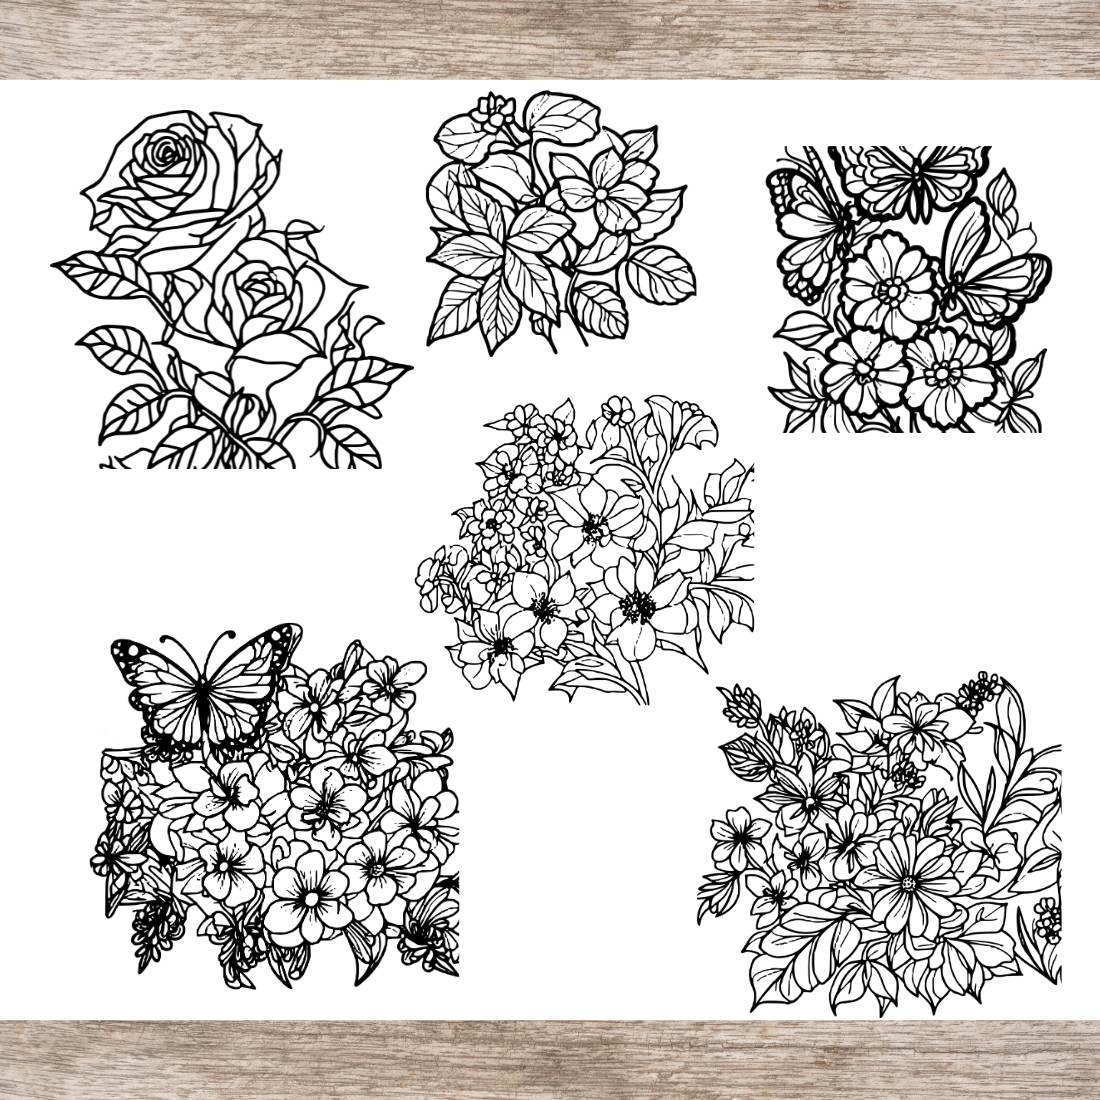 Title: 6 Flower Drawing Floral Coloring Pages with butterflies For Adults (SVG and PNG) preview image.